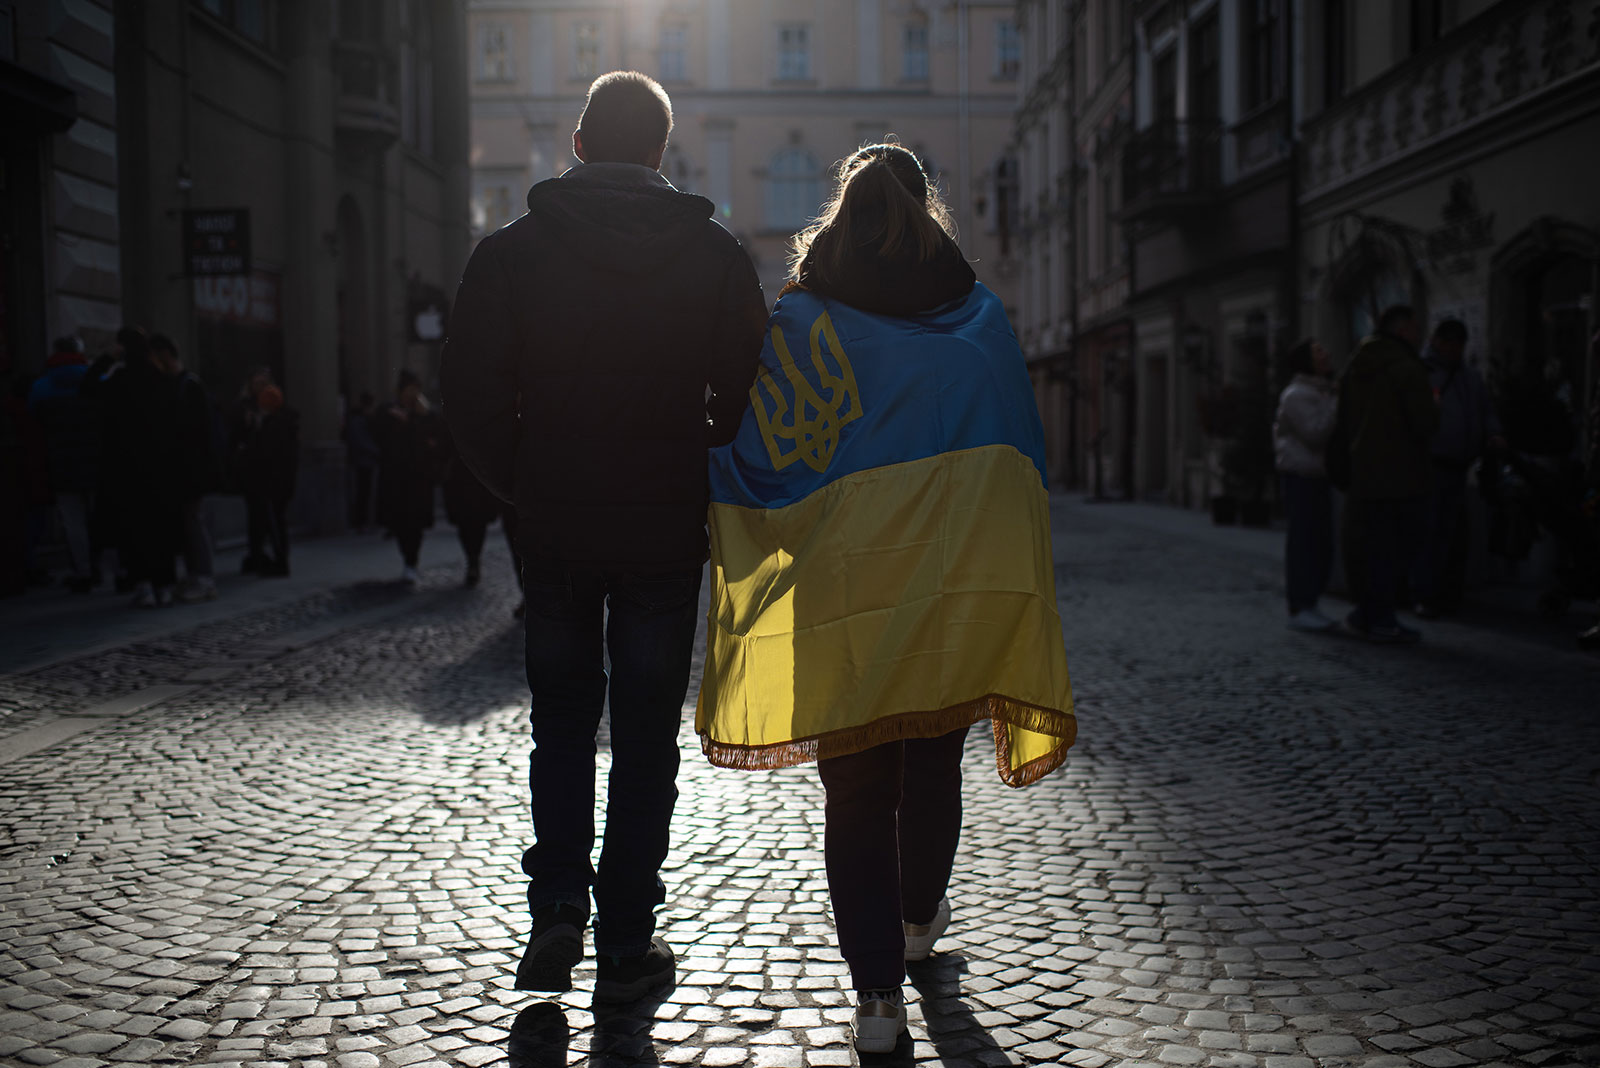 A man and a woman wrapped in the Ukrainian national flag walk the street on March 20 in Lviv.